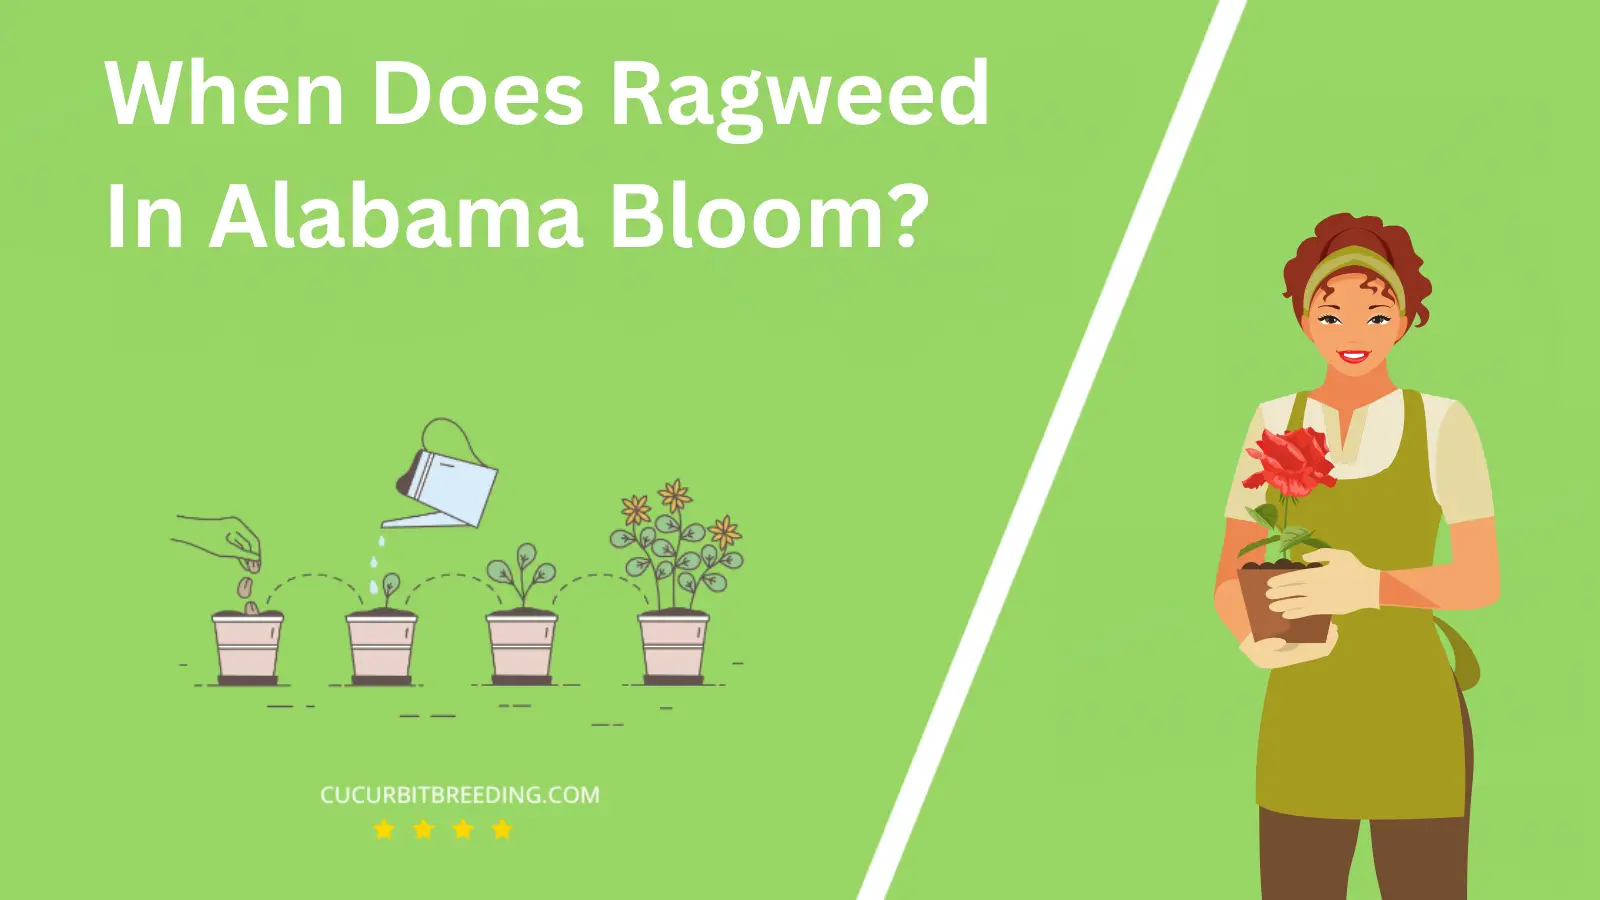 When Does Ragweed In Alabama Bloom?